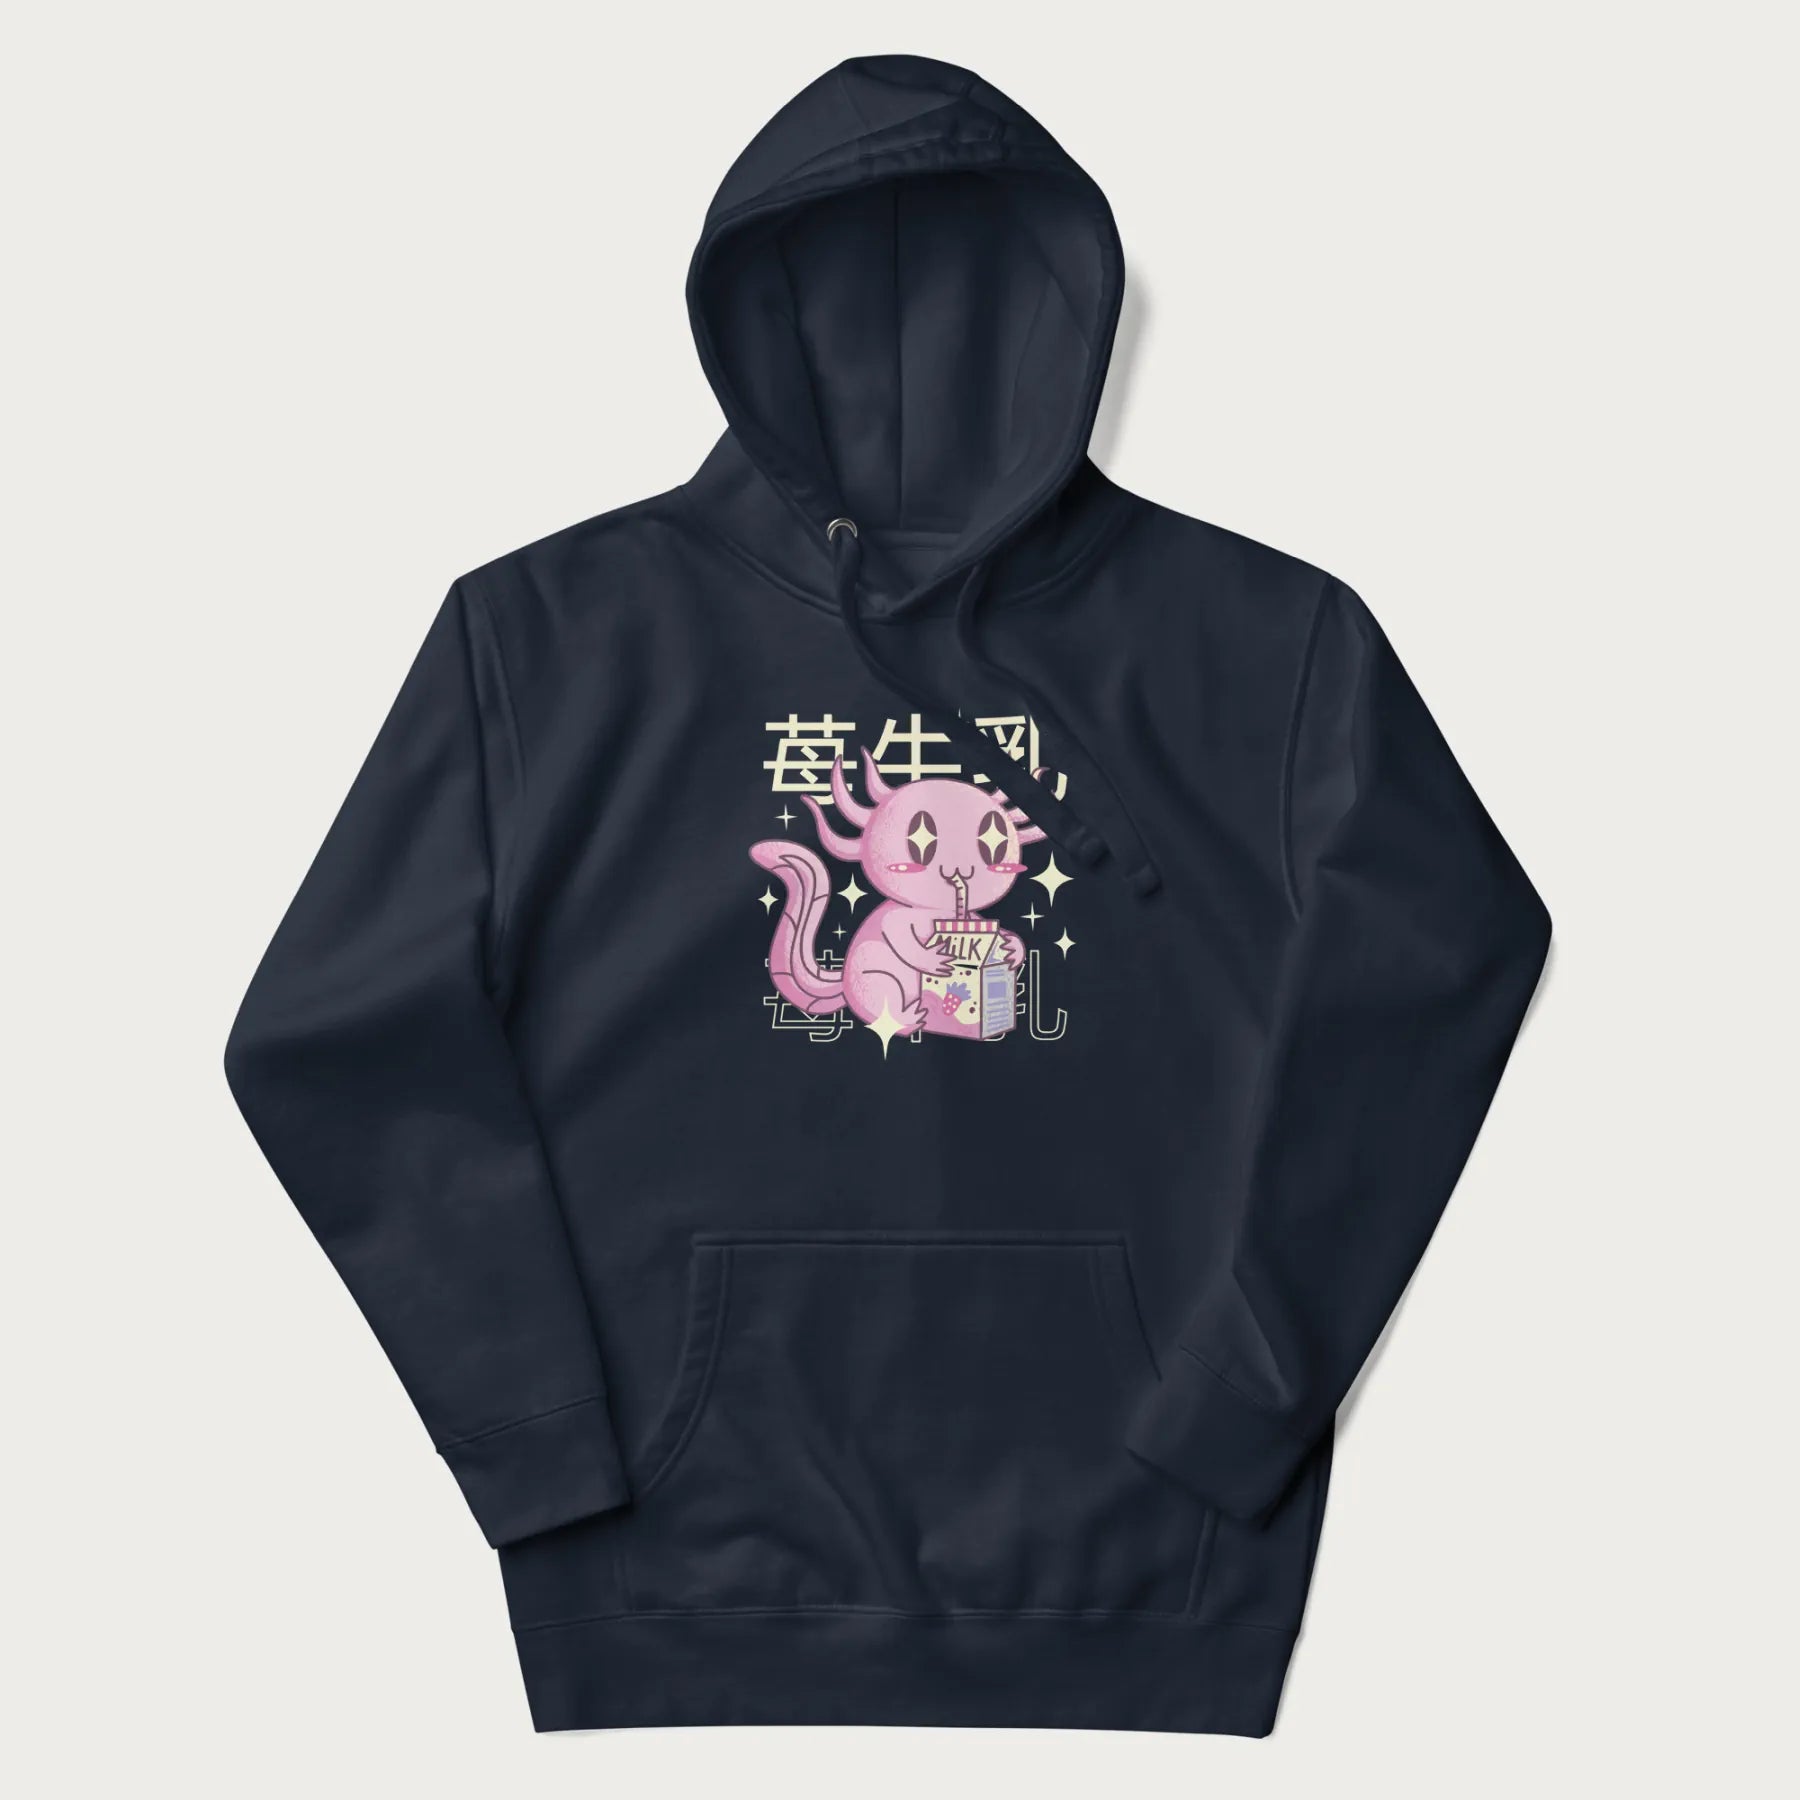 Navy blue hoodie with Japanese graphic of a cute pink axolotl sipping strawberry milk from a carton, with Japanese text '苺牛乳' (Strawberry Milk).